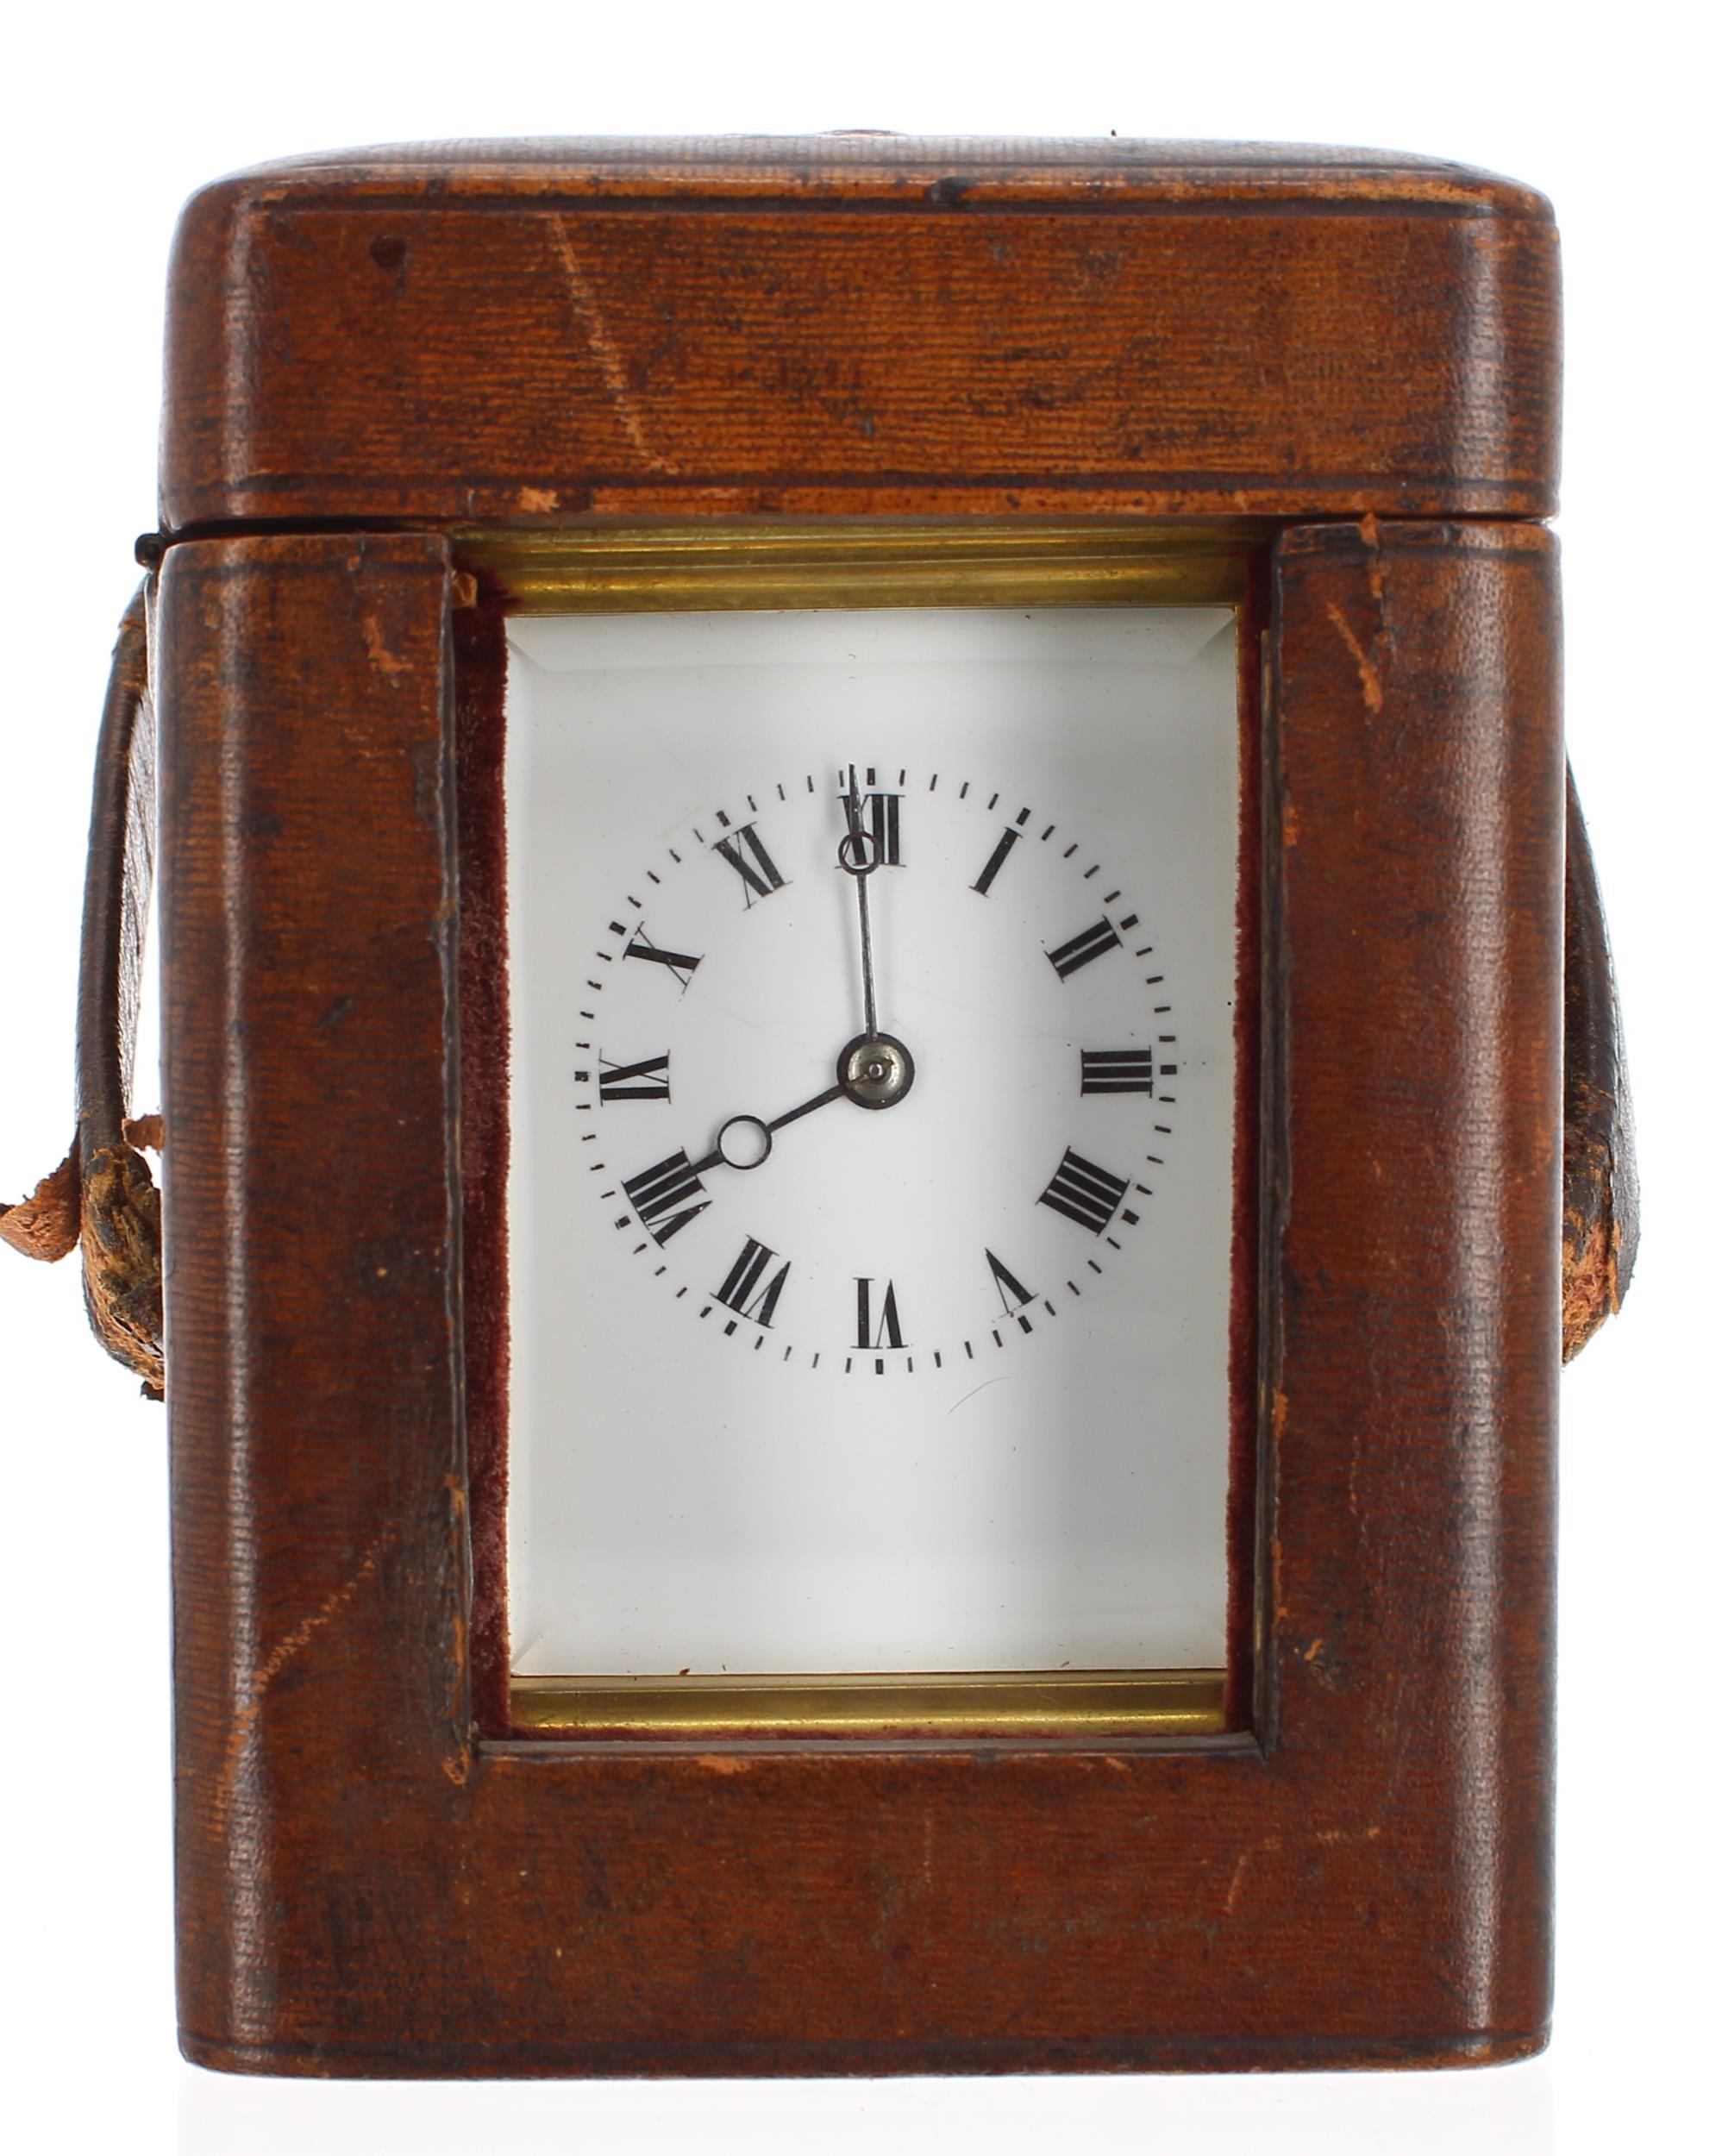 Small French repeater carriage clock striking on a gong, the back plate inscribed Just, no. 21129,